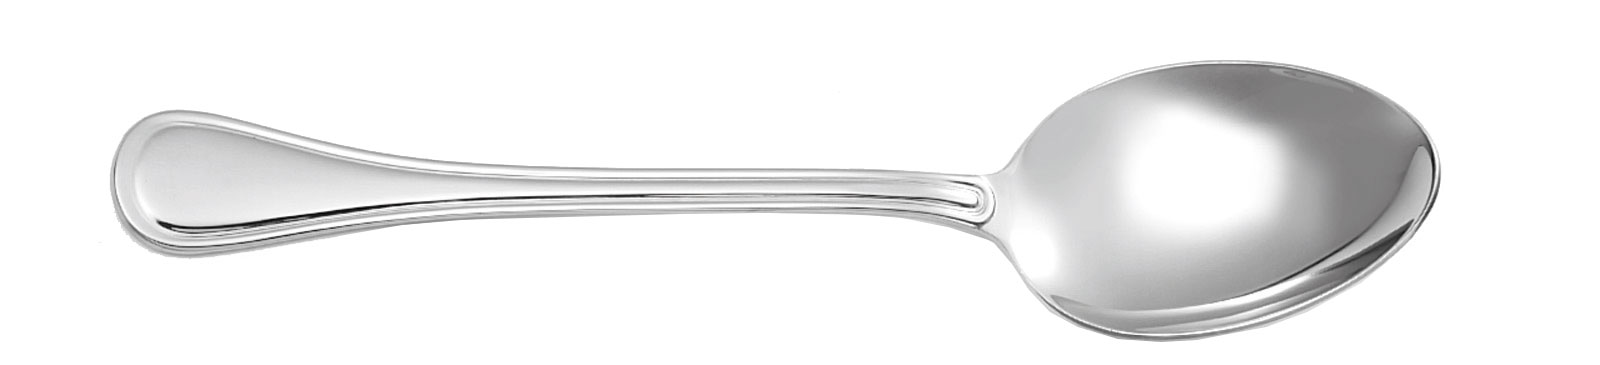 Walco Stainless UL-012 Serving Spoon, Solid